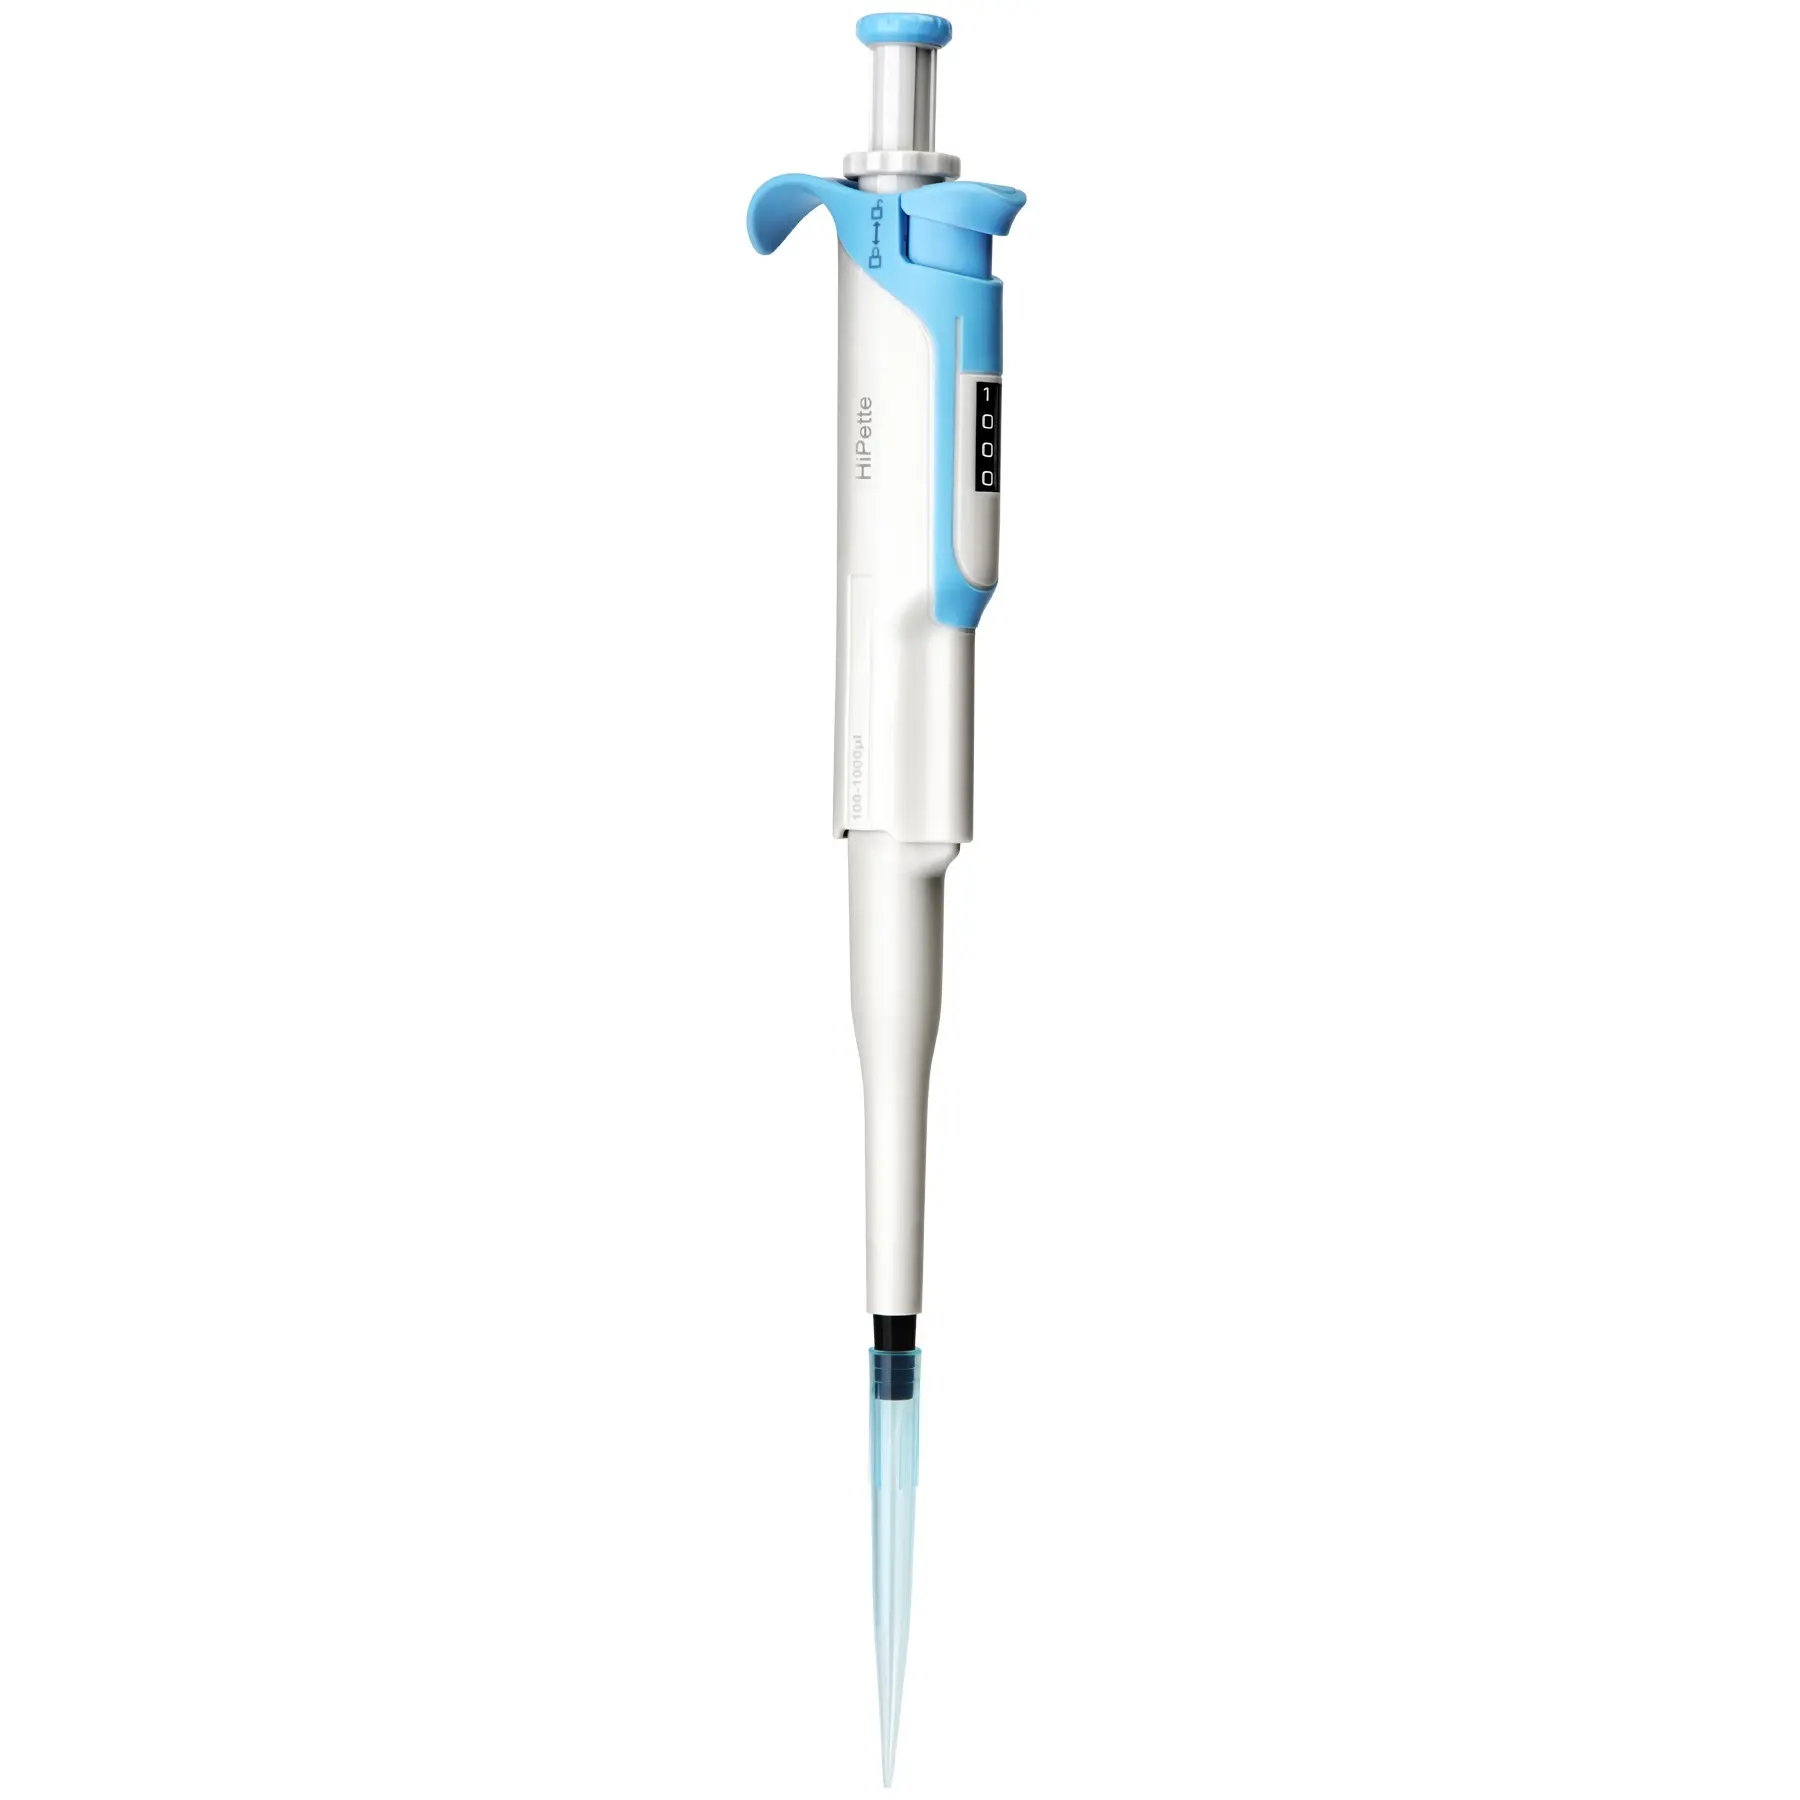 CHINCAN HiPette Fully Autoclavable Mechanical Pipette digital micropipette electronic pipette for laboratory use